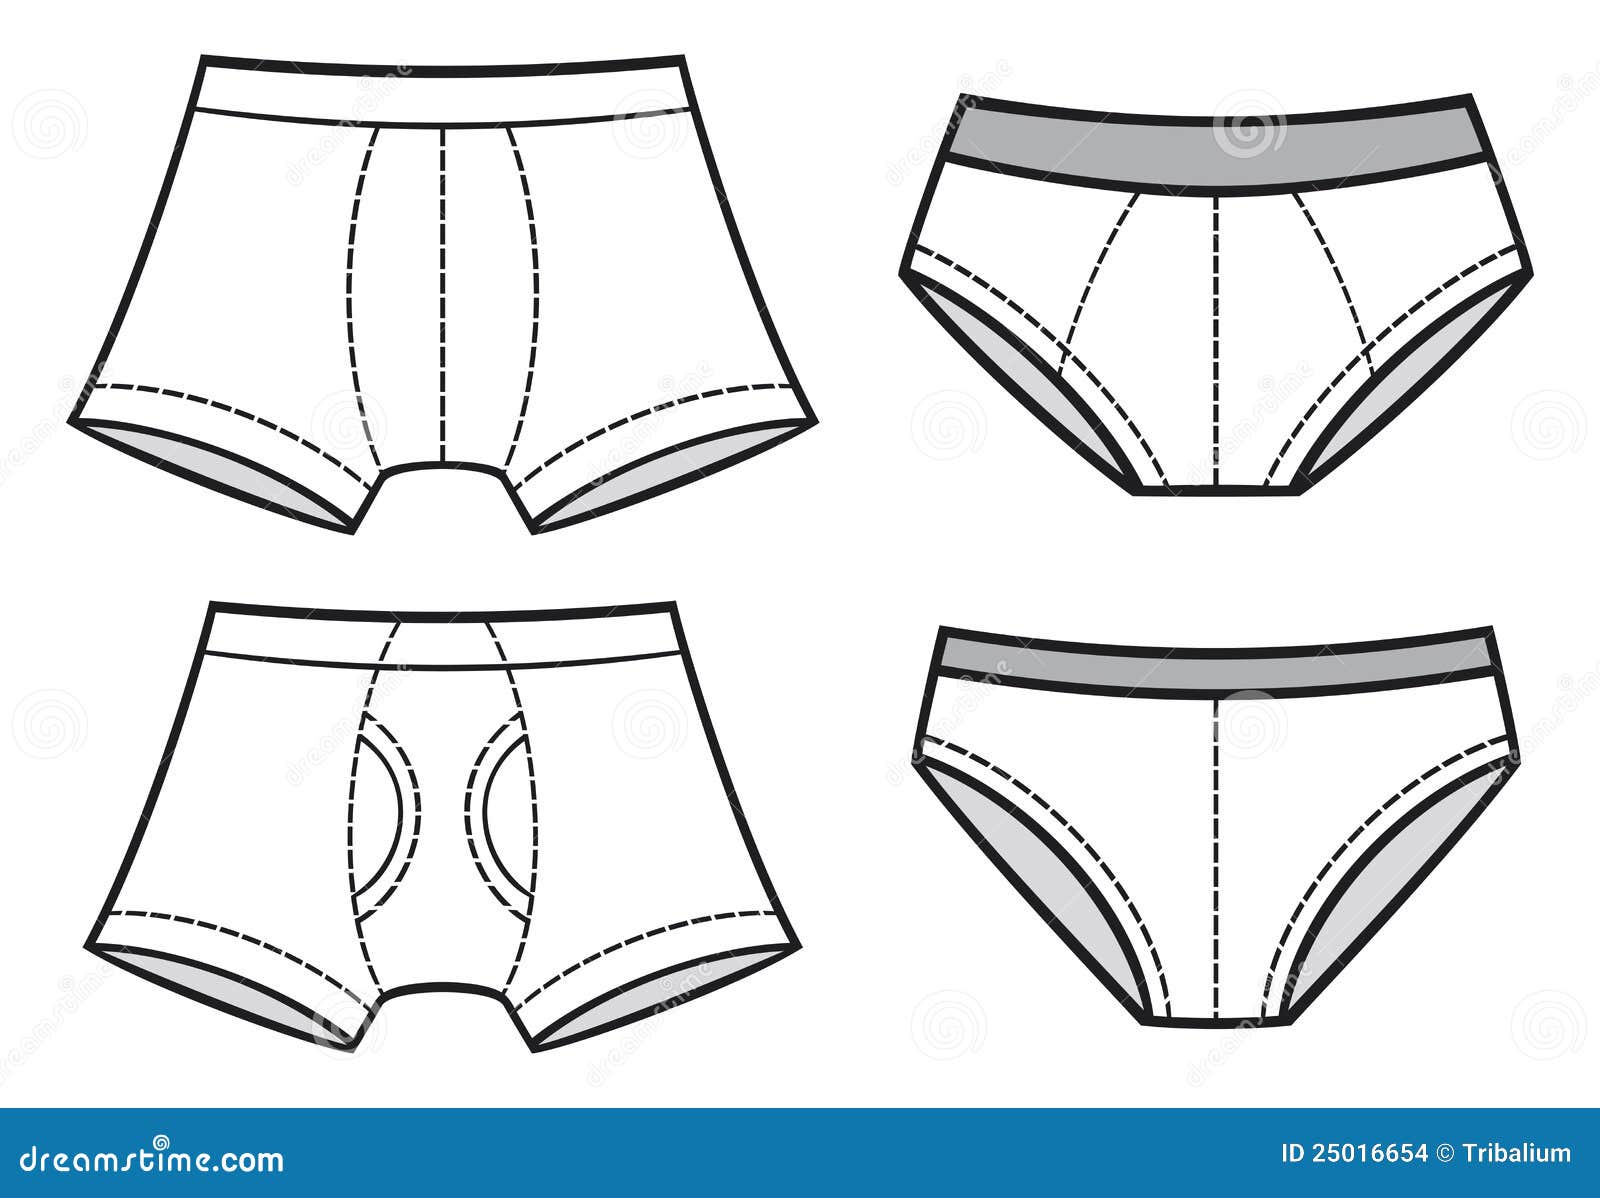 underwear coloring pages - photo #39